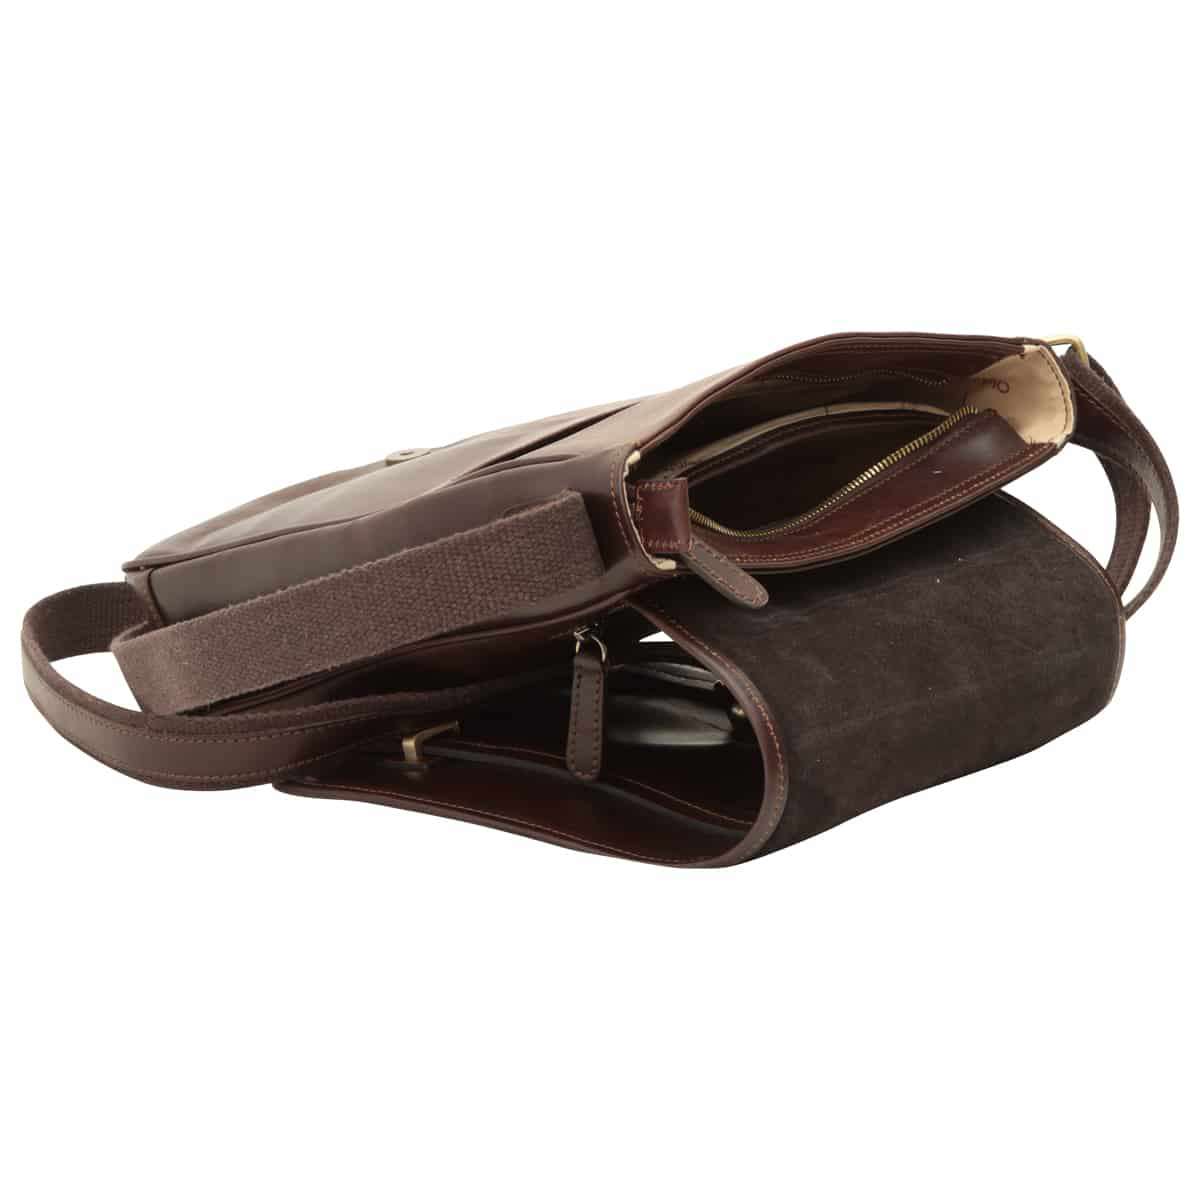 Medium leather bag with double magnetic closure - Dark Brown | 406589TM US | Old Angler Firenze